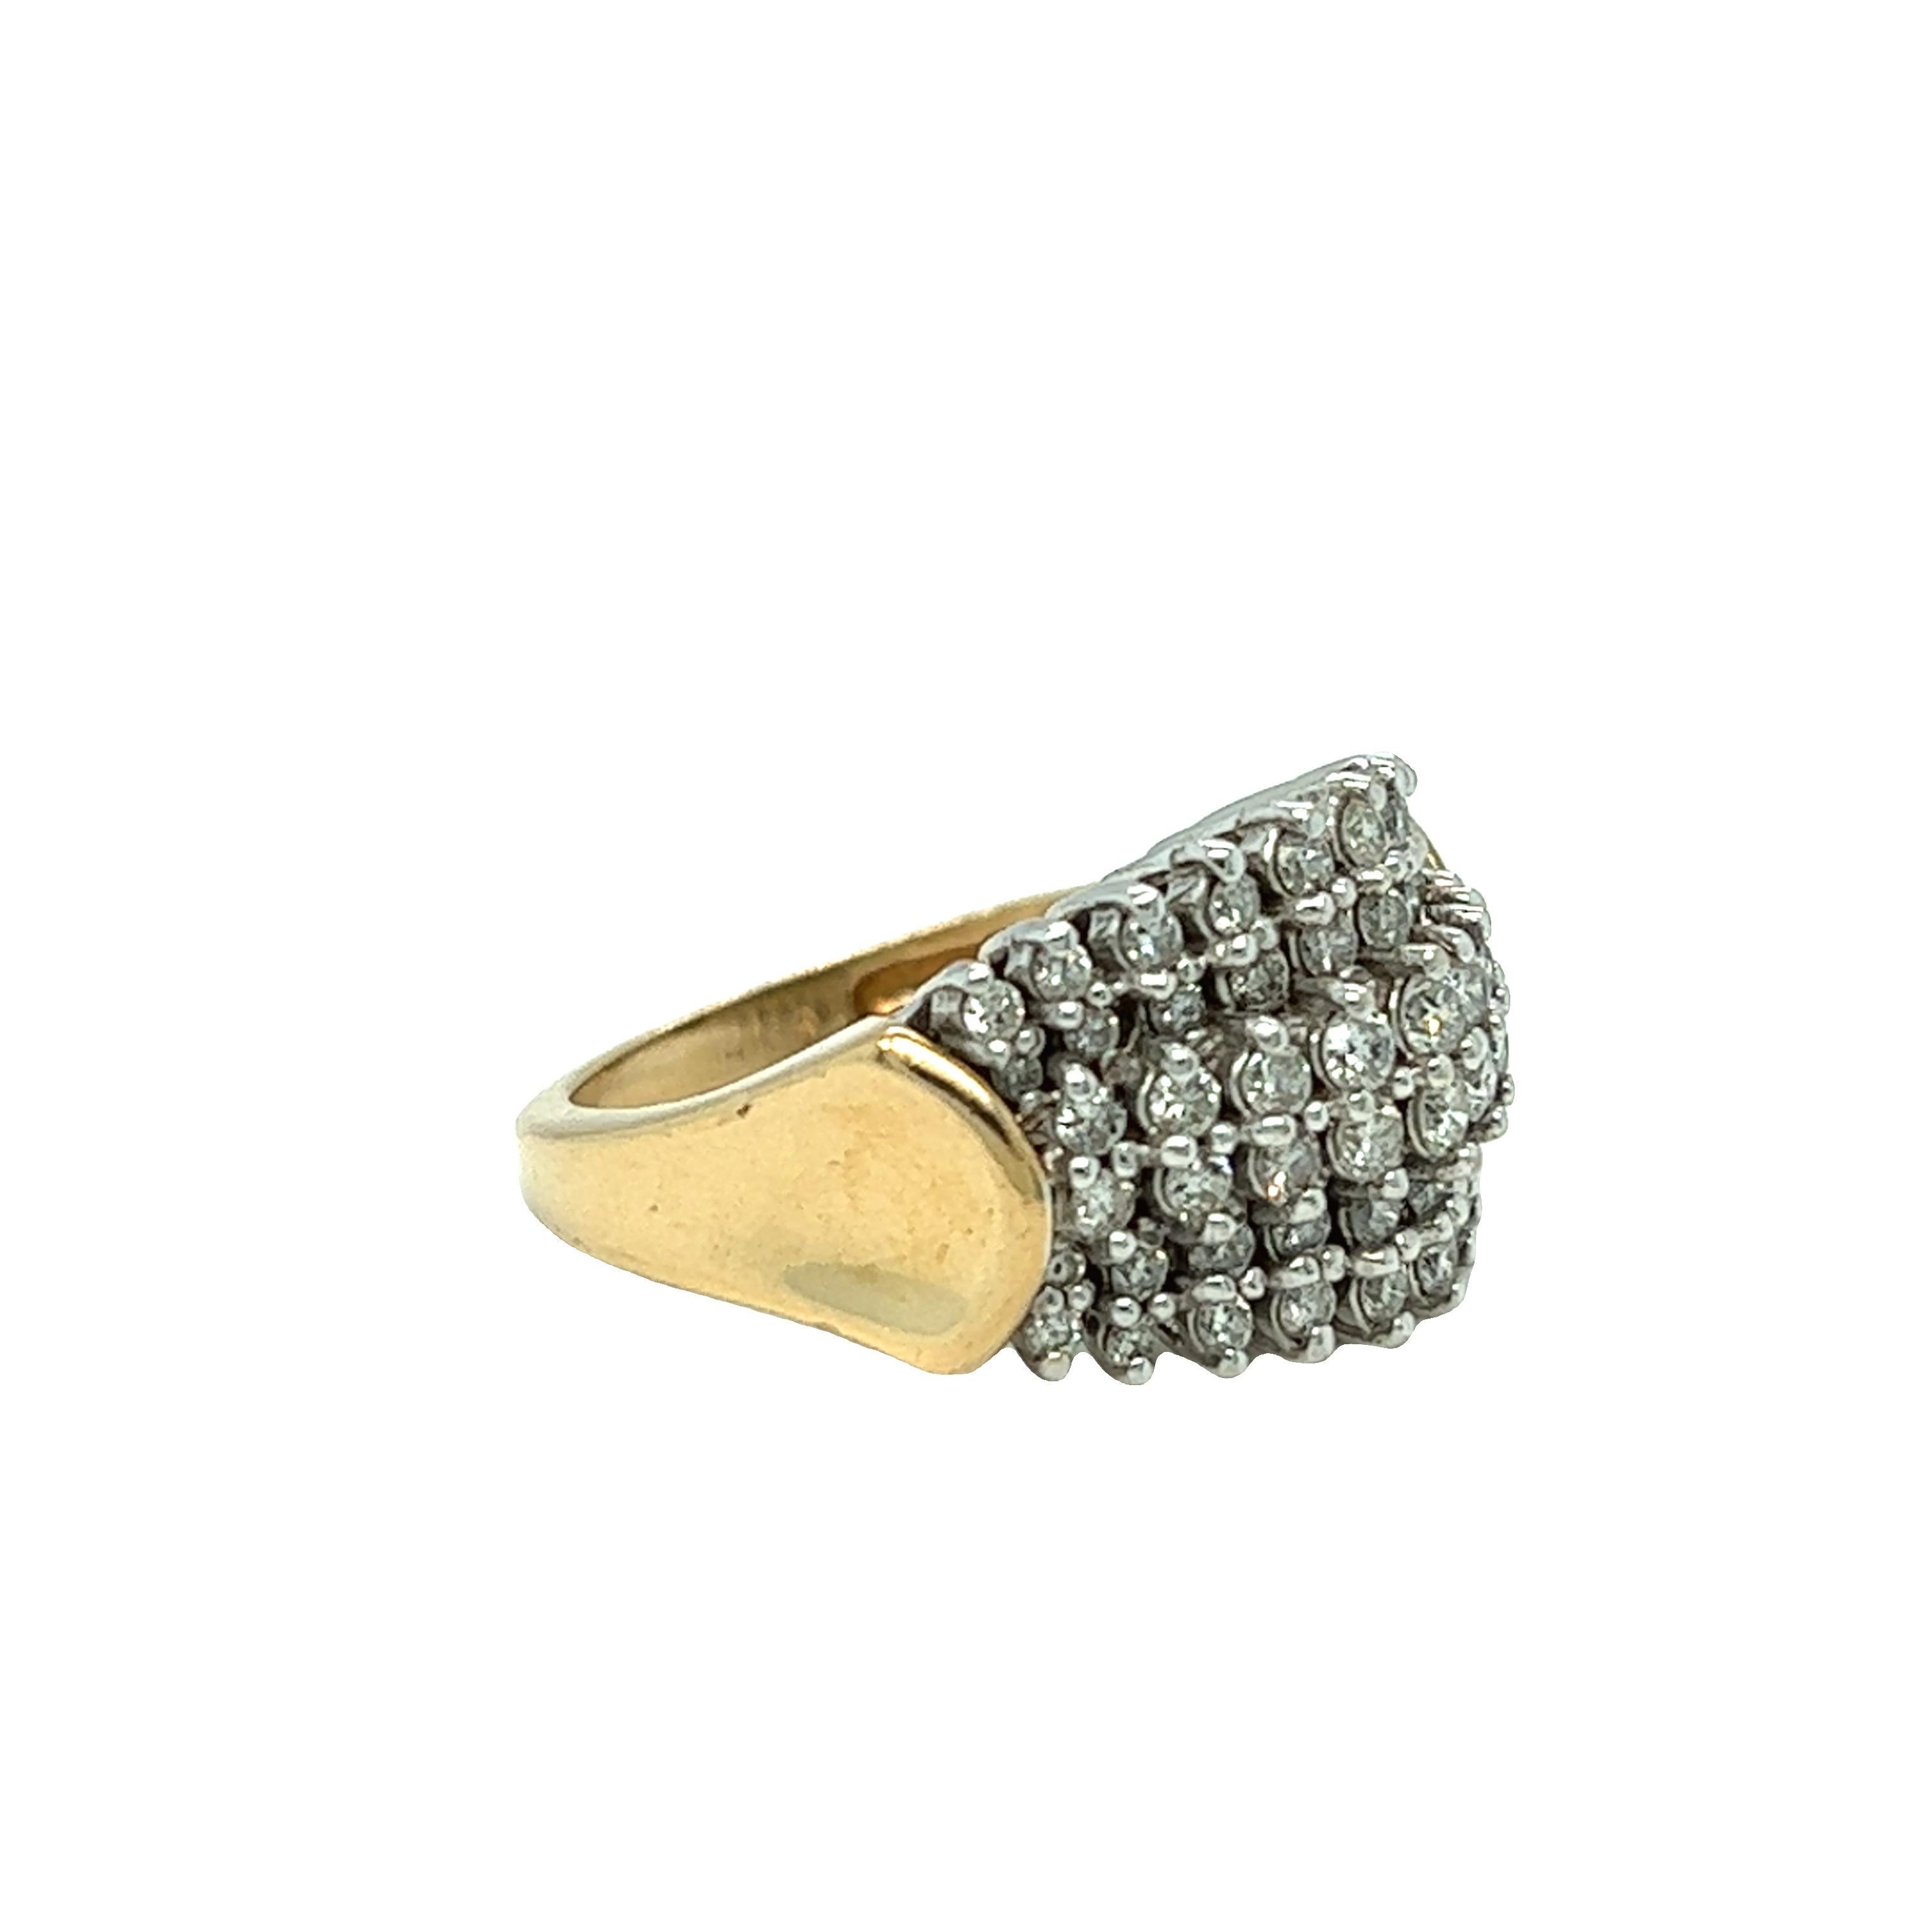 From our estate collection, this pyramid cluster diamond ring features six rows of round brilliant cut diamonds weighing approximate 2.32 carats. The ring is crafted in 14k yellow gold and the top of the ring in white gold. The beautiful two tone